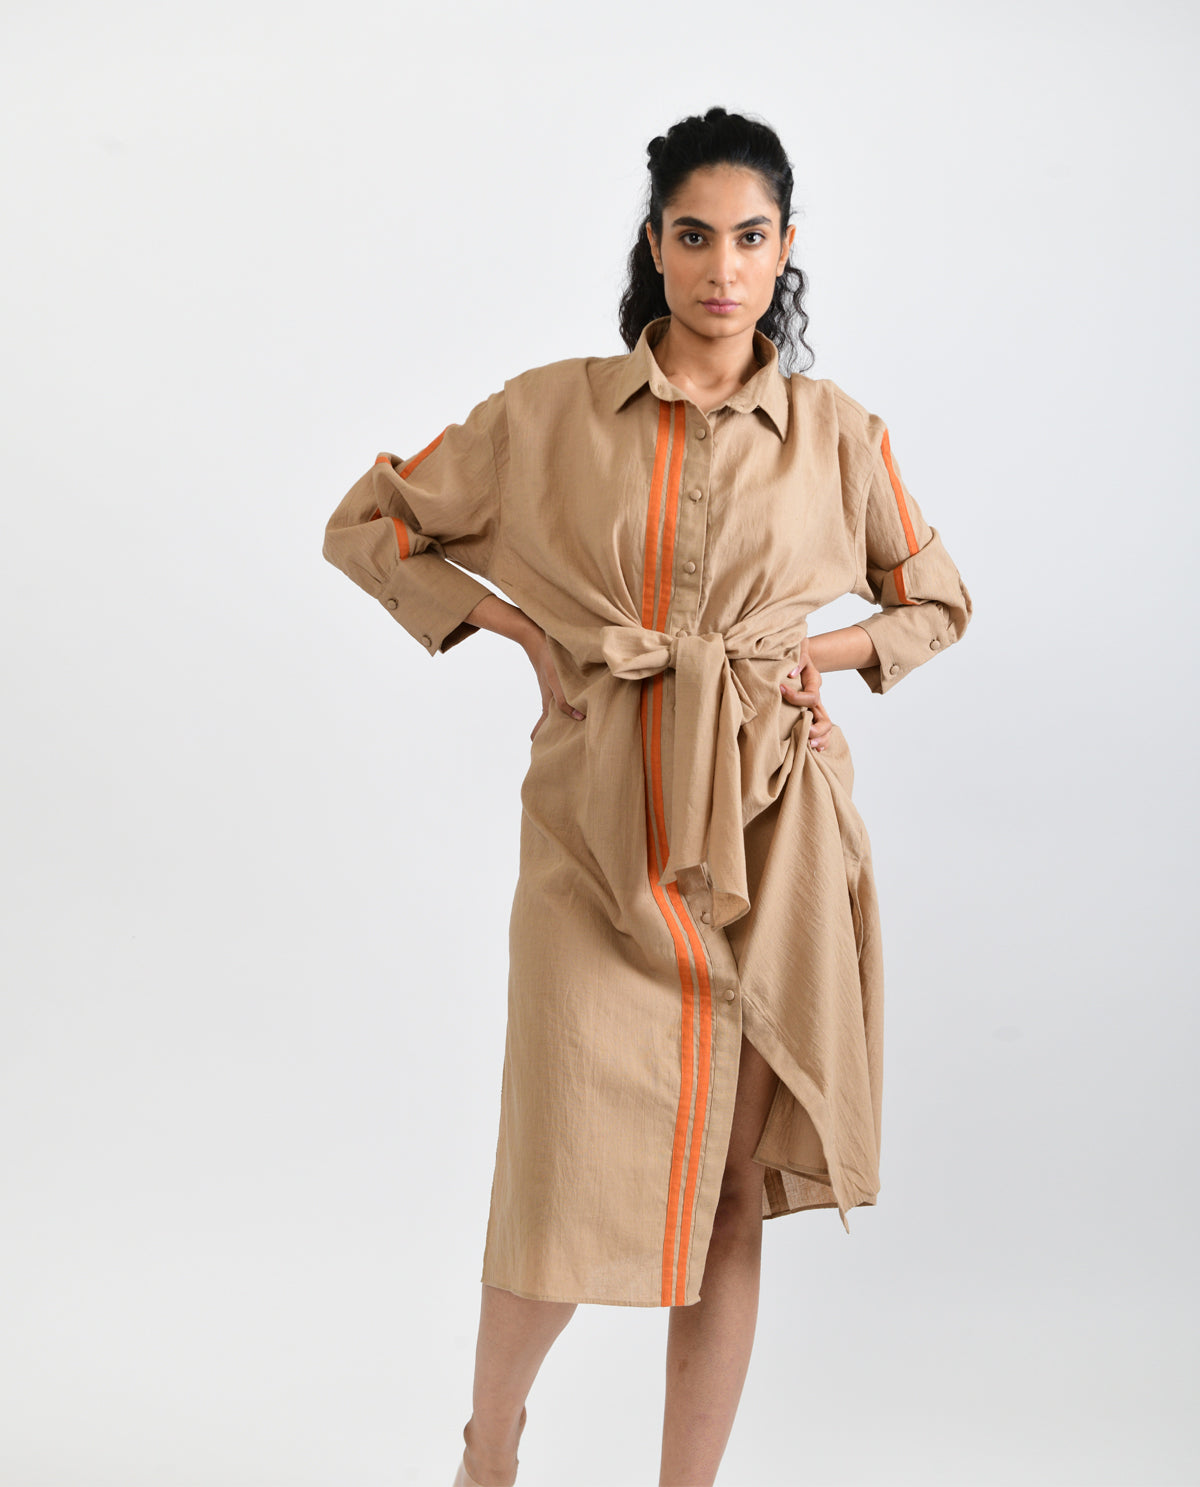 Beige Handloom Cotton Midi Dress at Kamakhyaa by Rias Jaipur. This item is Beige, Casual Wear, Handloom Cotton, Handspun, Handwoven, Hue, Midi Dresses, Relaxed Fit, Shirt Dresses, Solids, Stripes, Womenswear